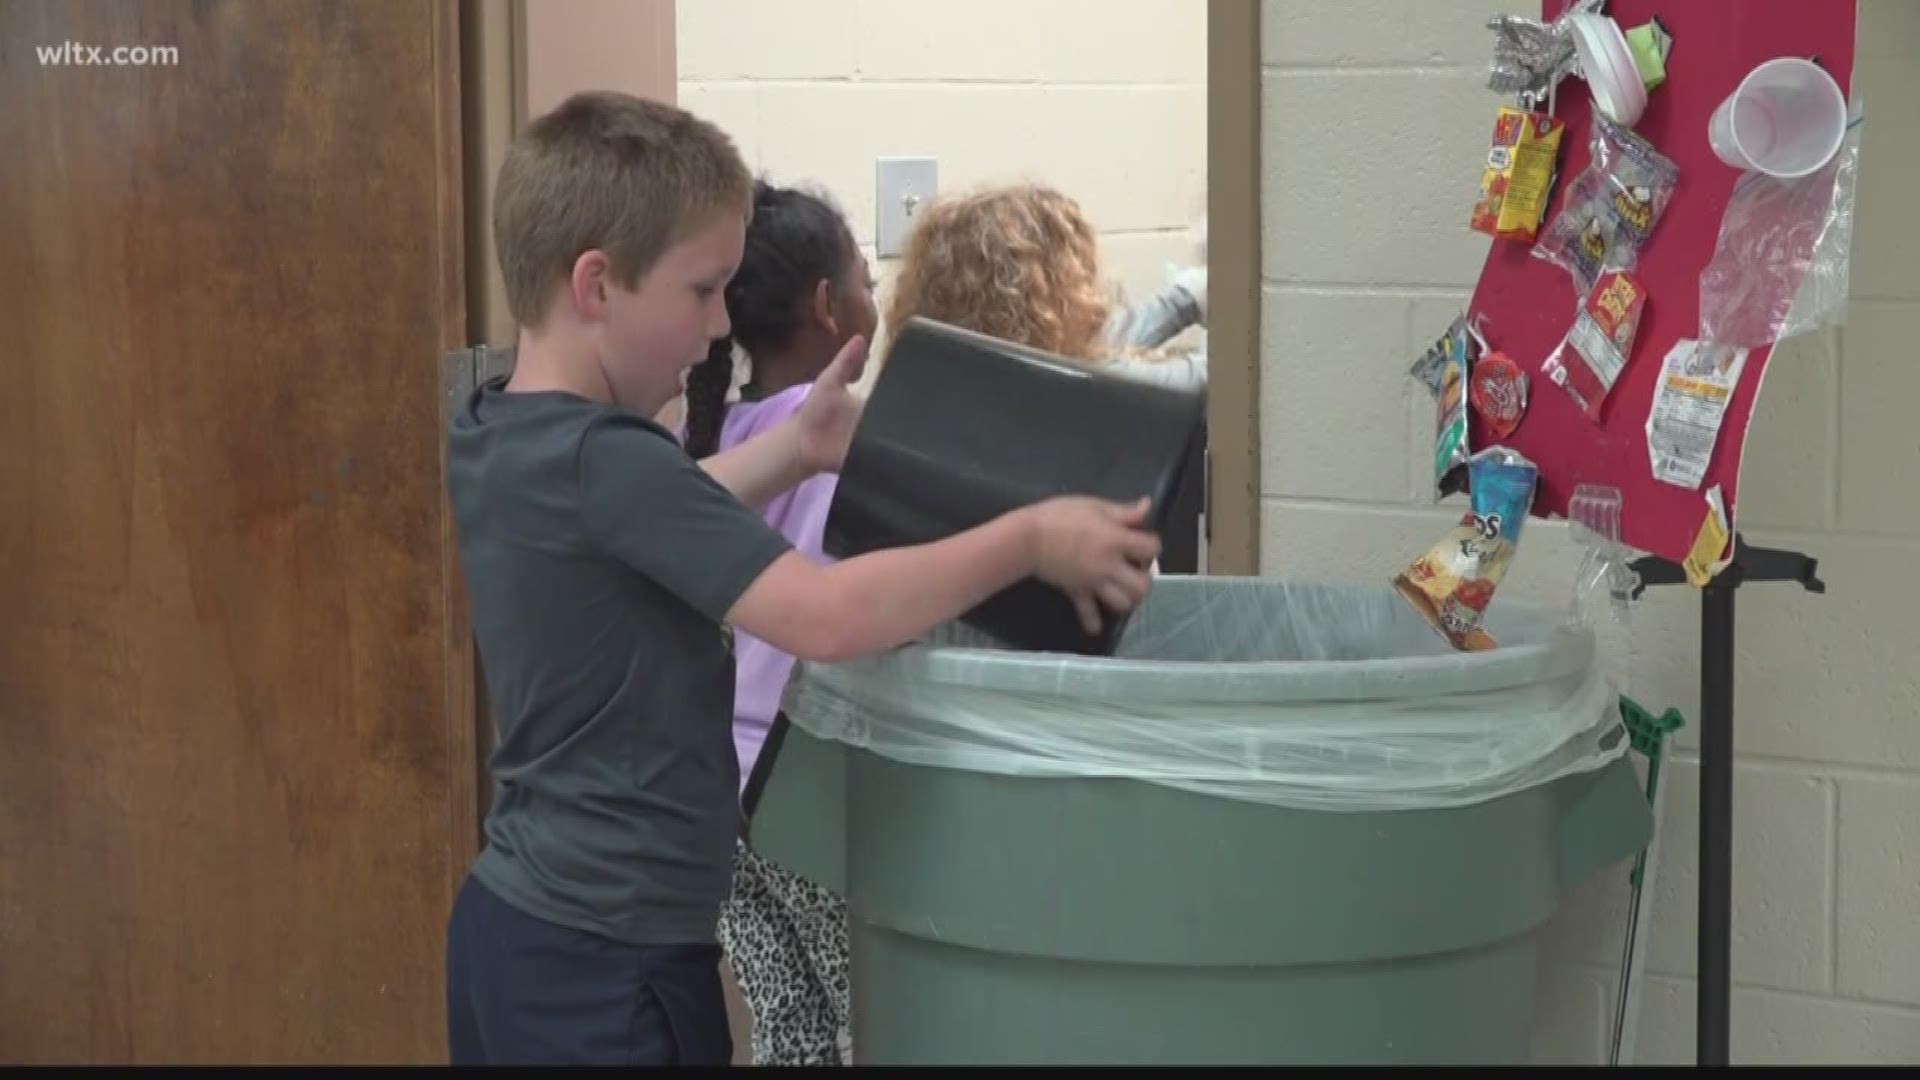 Through a partnership with Richland County, SMART recycling and ReSoil, food waste is collected at Dutch Fork Elementary School every daythen taken to be turned into compost